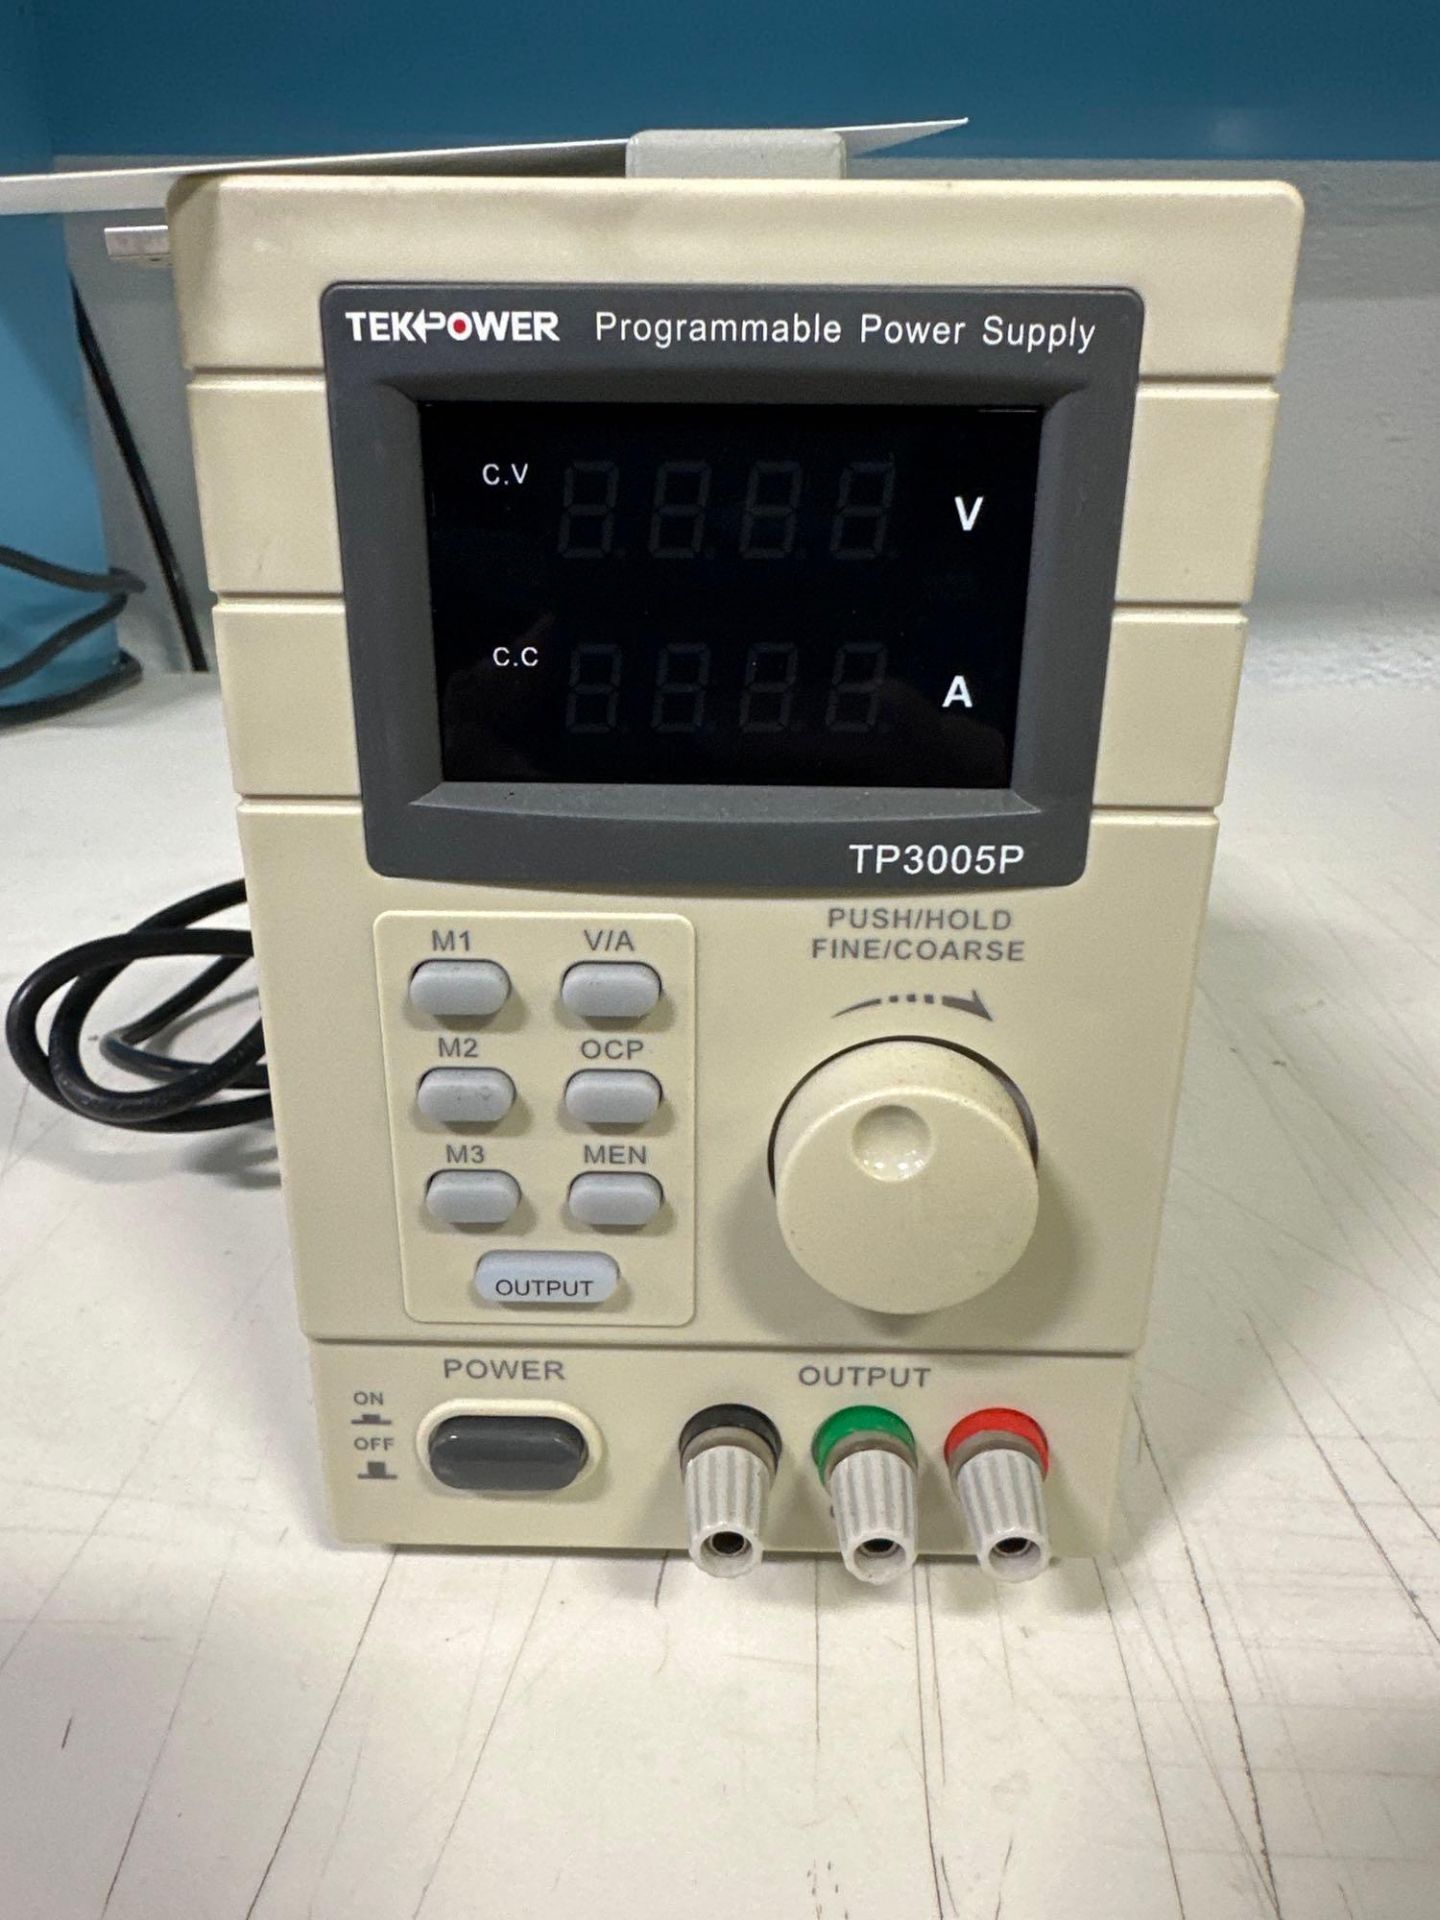 TEKPOWER TP3005P PROGRAMMABLE POWER SUPPLY - Image 2 of 3